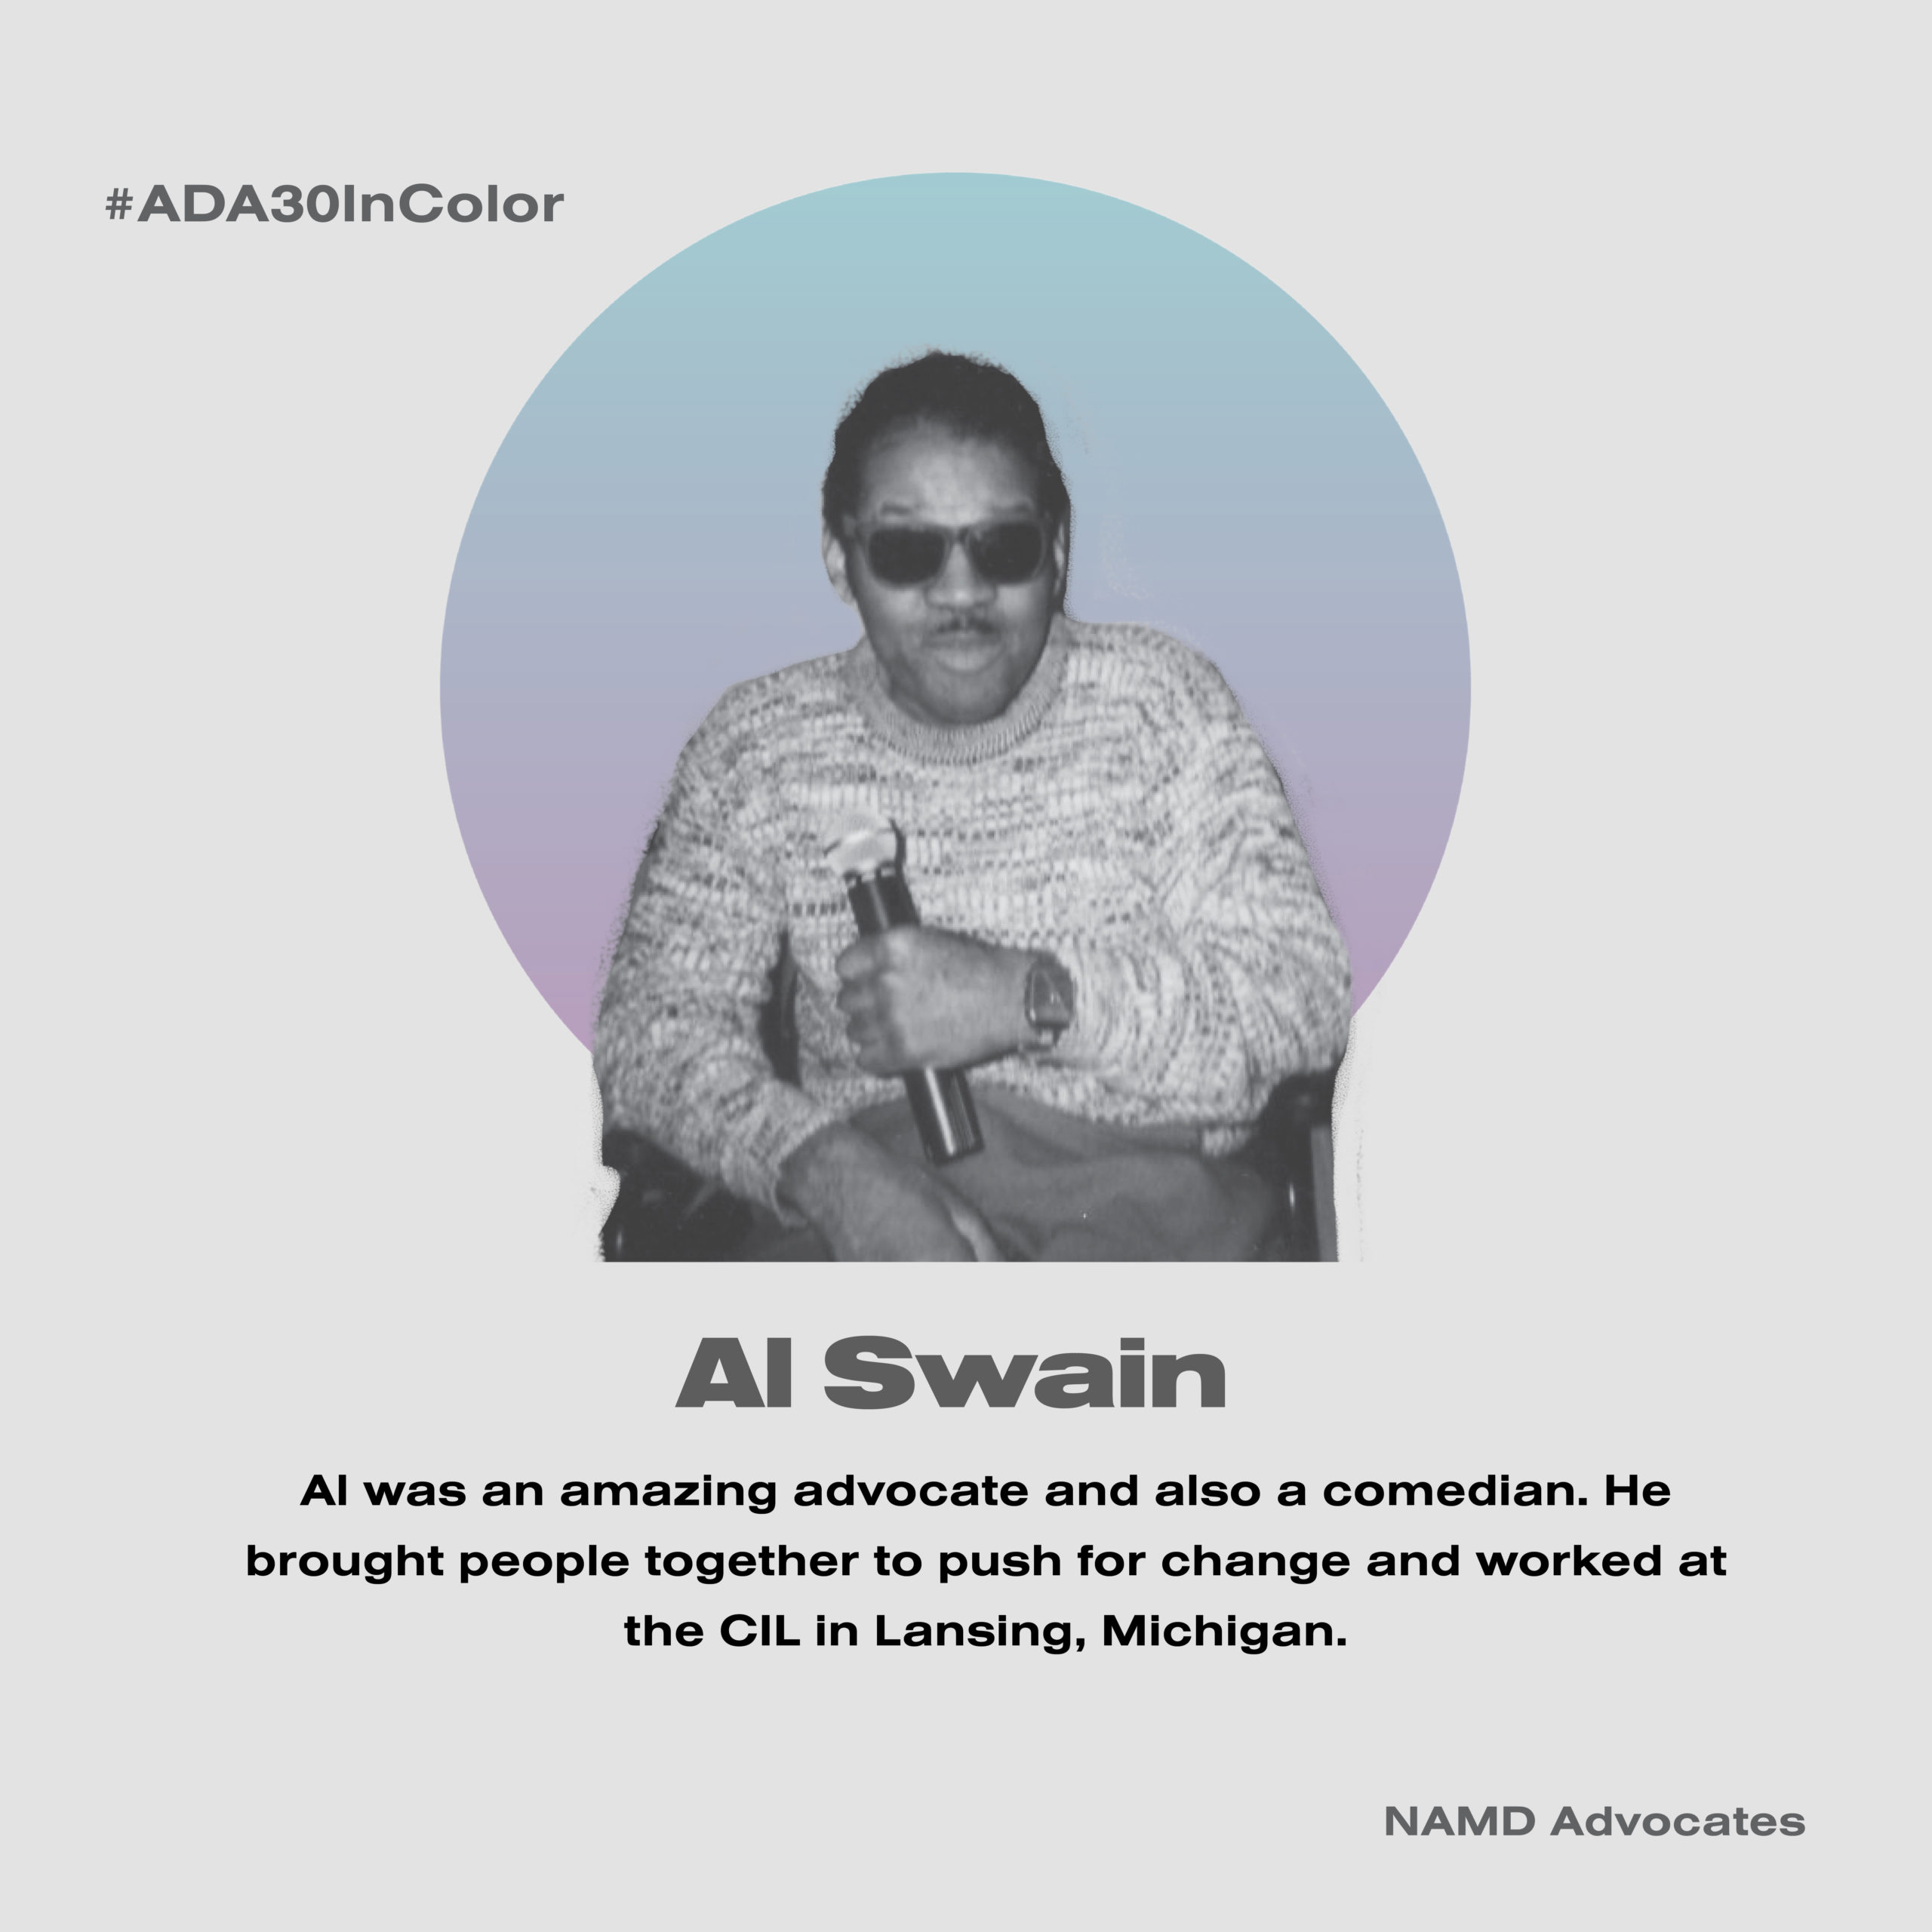 Al Swain. Al was an amazing advocate and also a comedian. He brought people together to push for change and worked at the CIL in Lansing, Michigan.